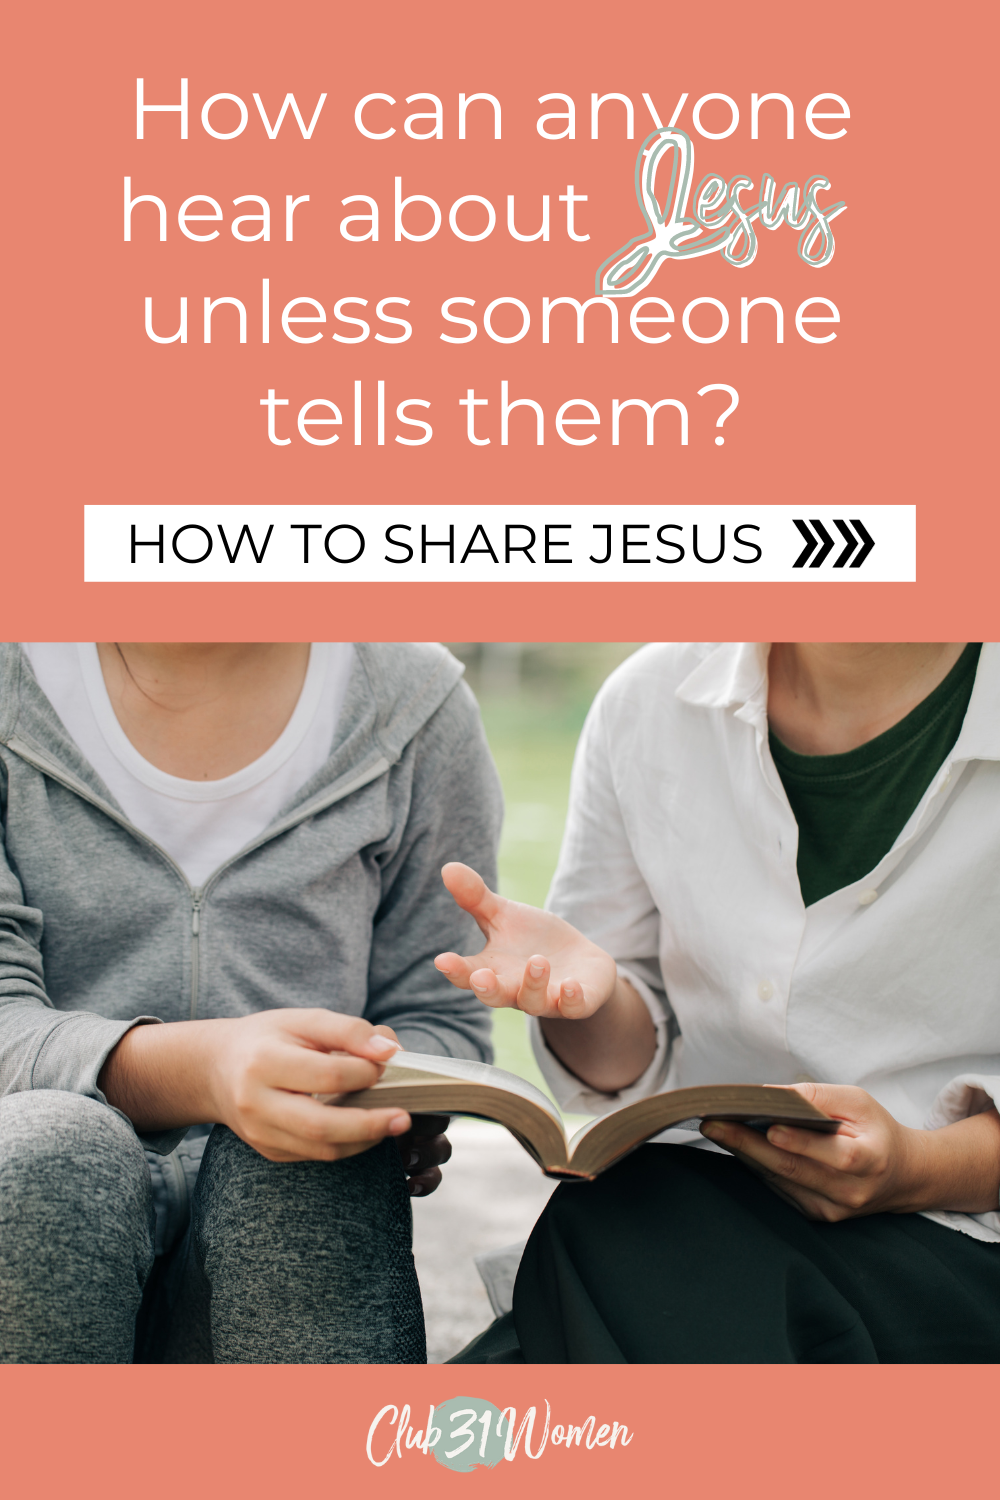 How to Talk to People about Jesus via @Club31Women